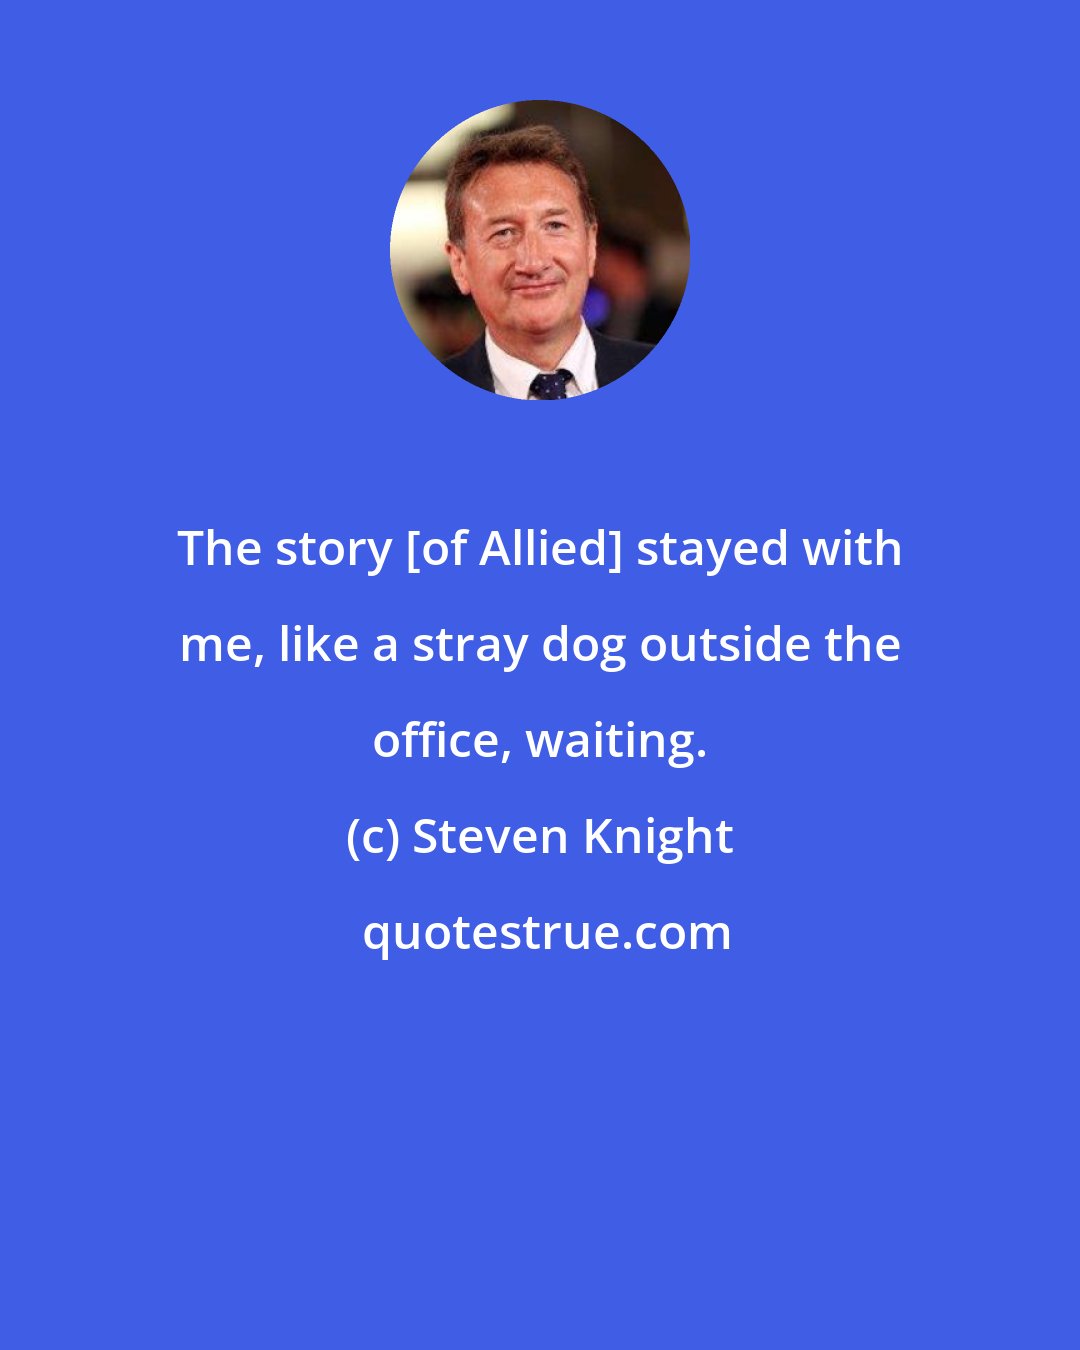 Steven Knight: The story [of Allied] stayed with me, like a stray dog outside the office, waiting.